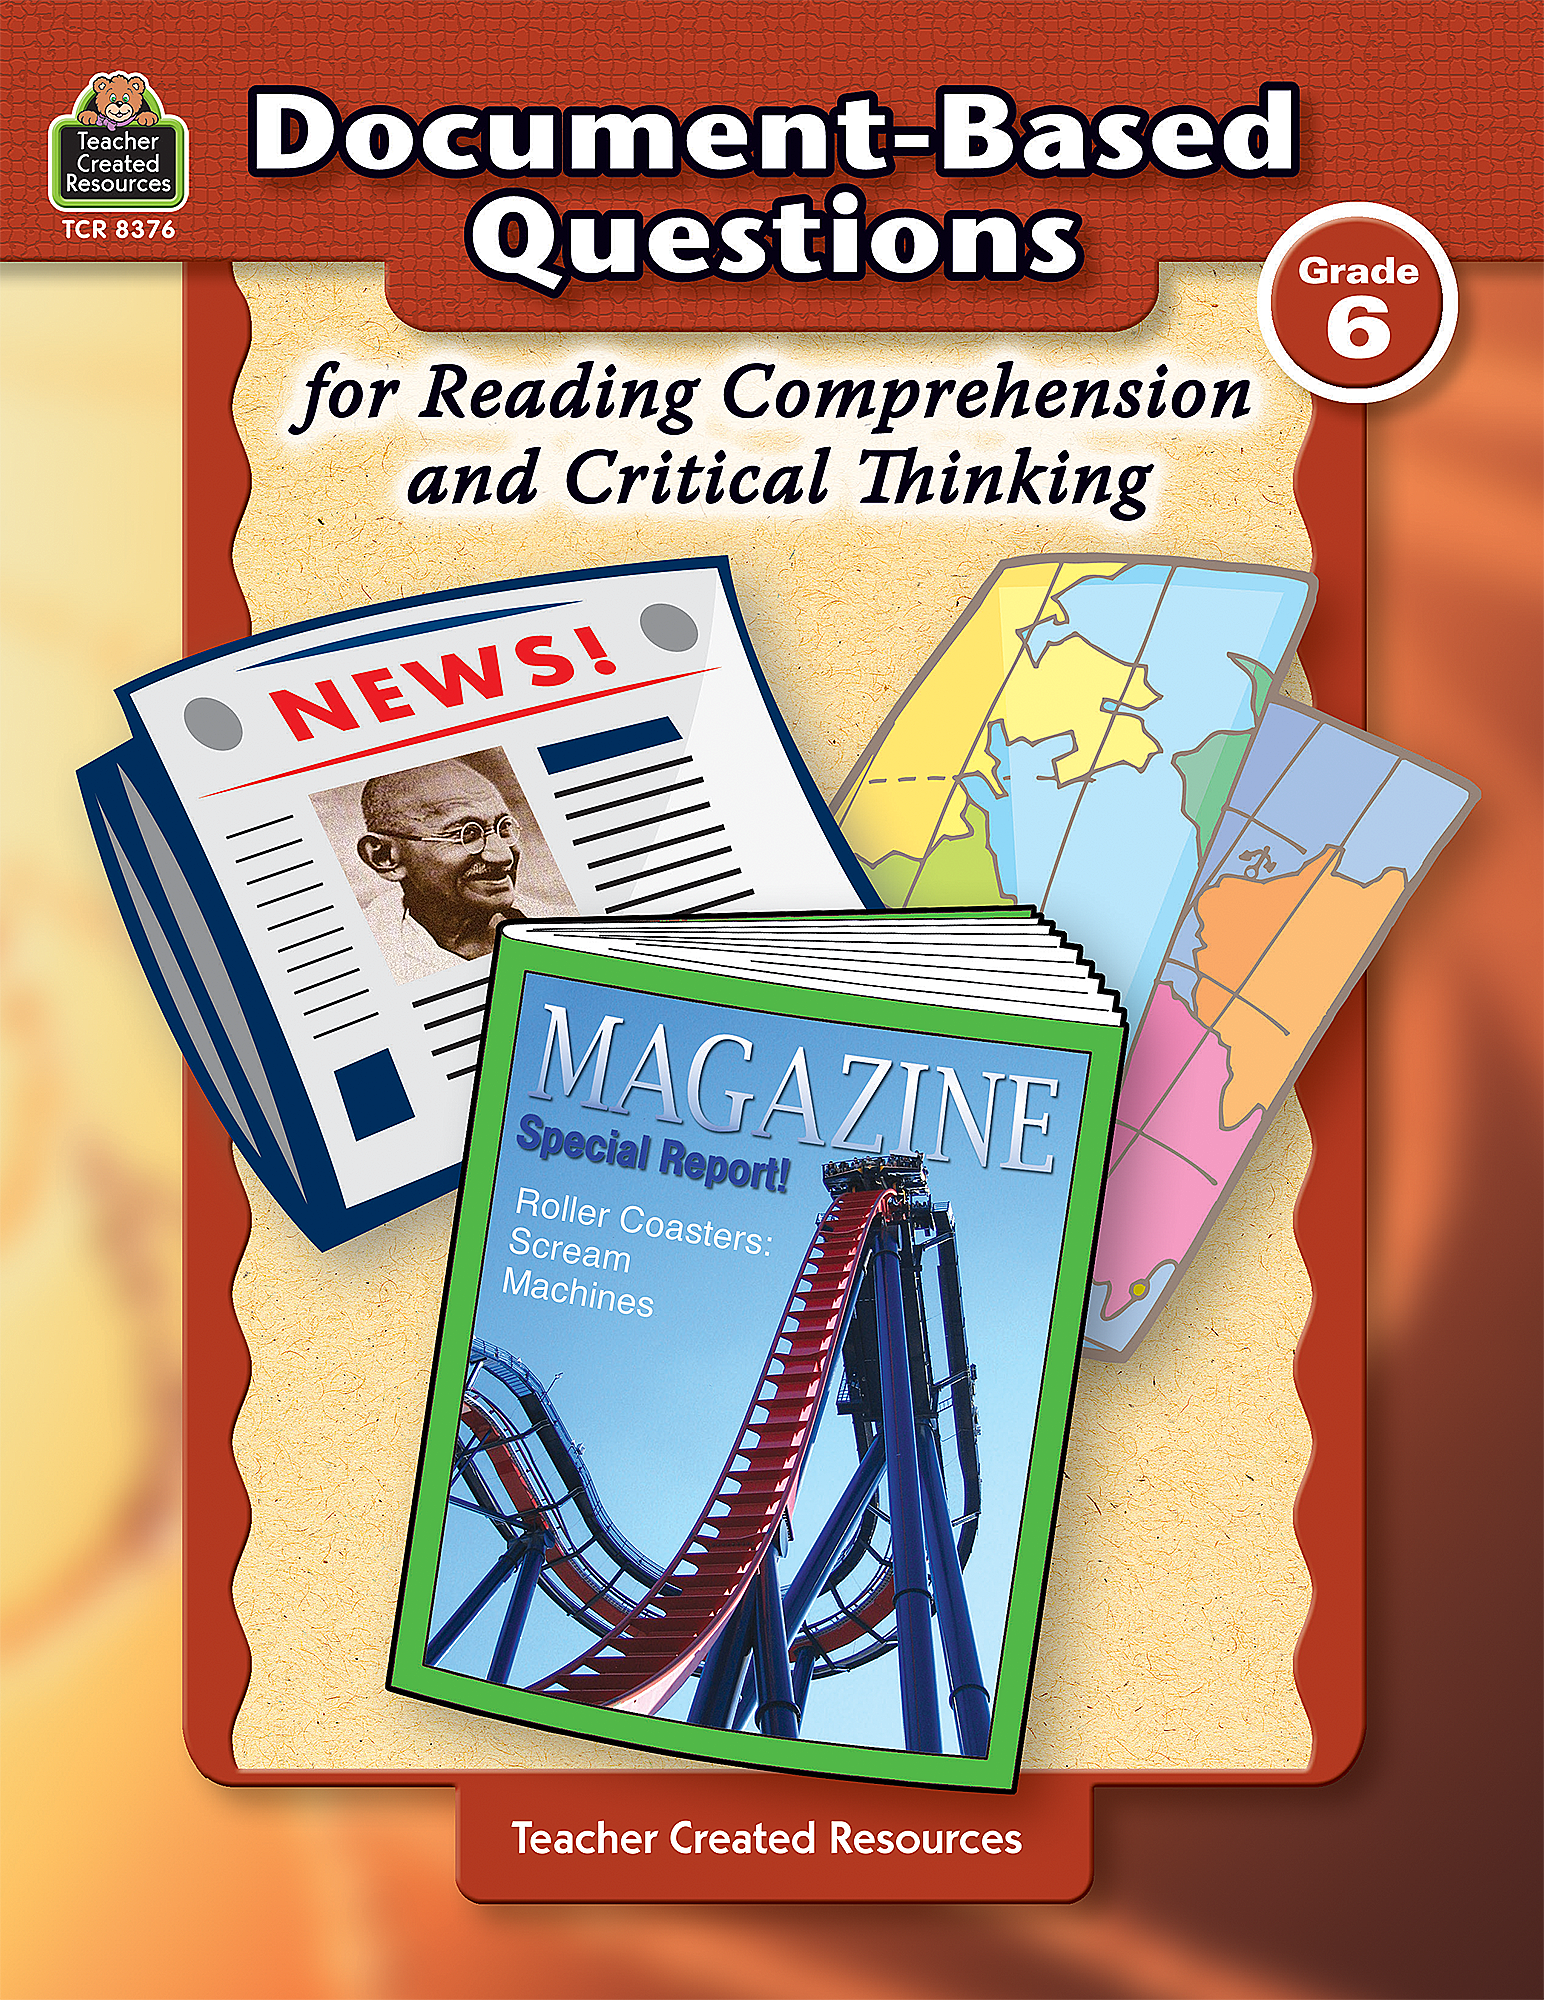 Document-based questions for reading comprehension and critical thinking